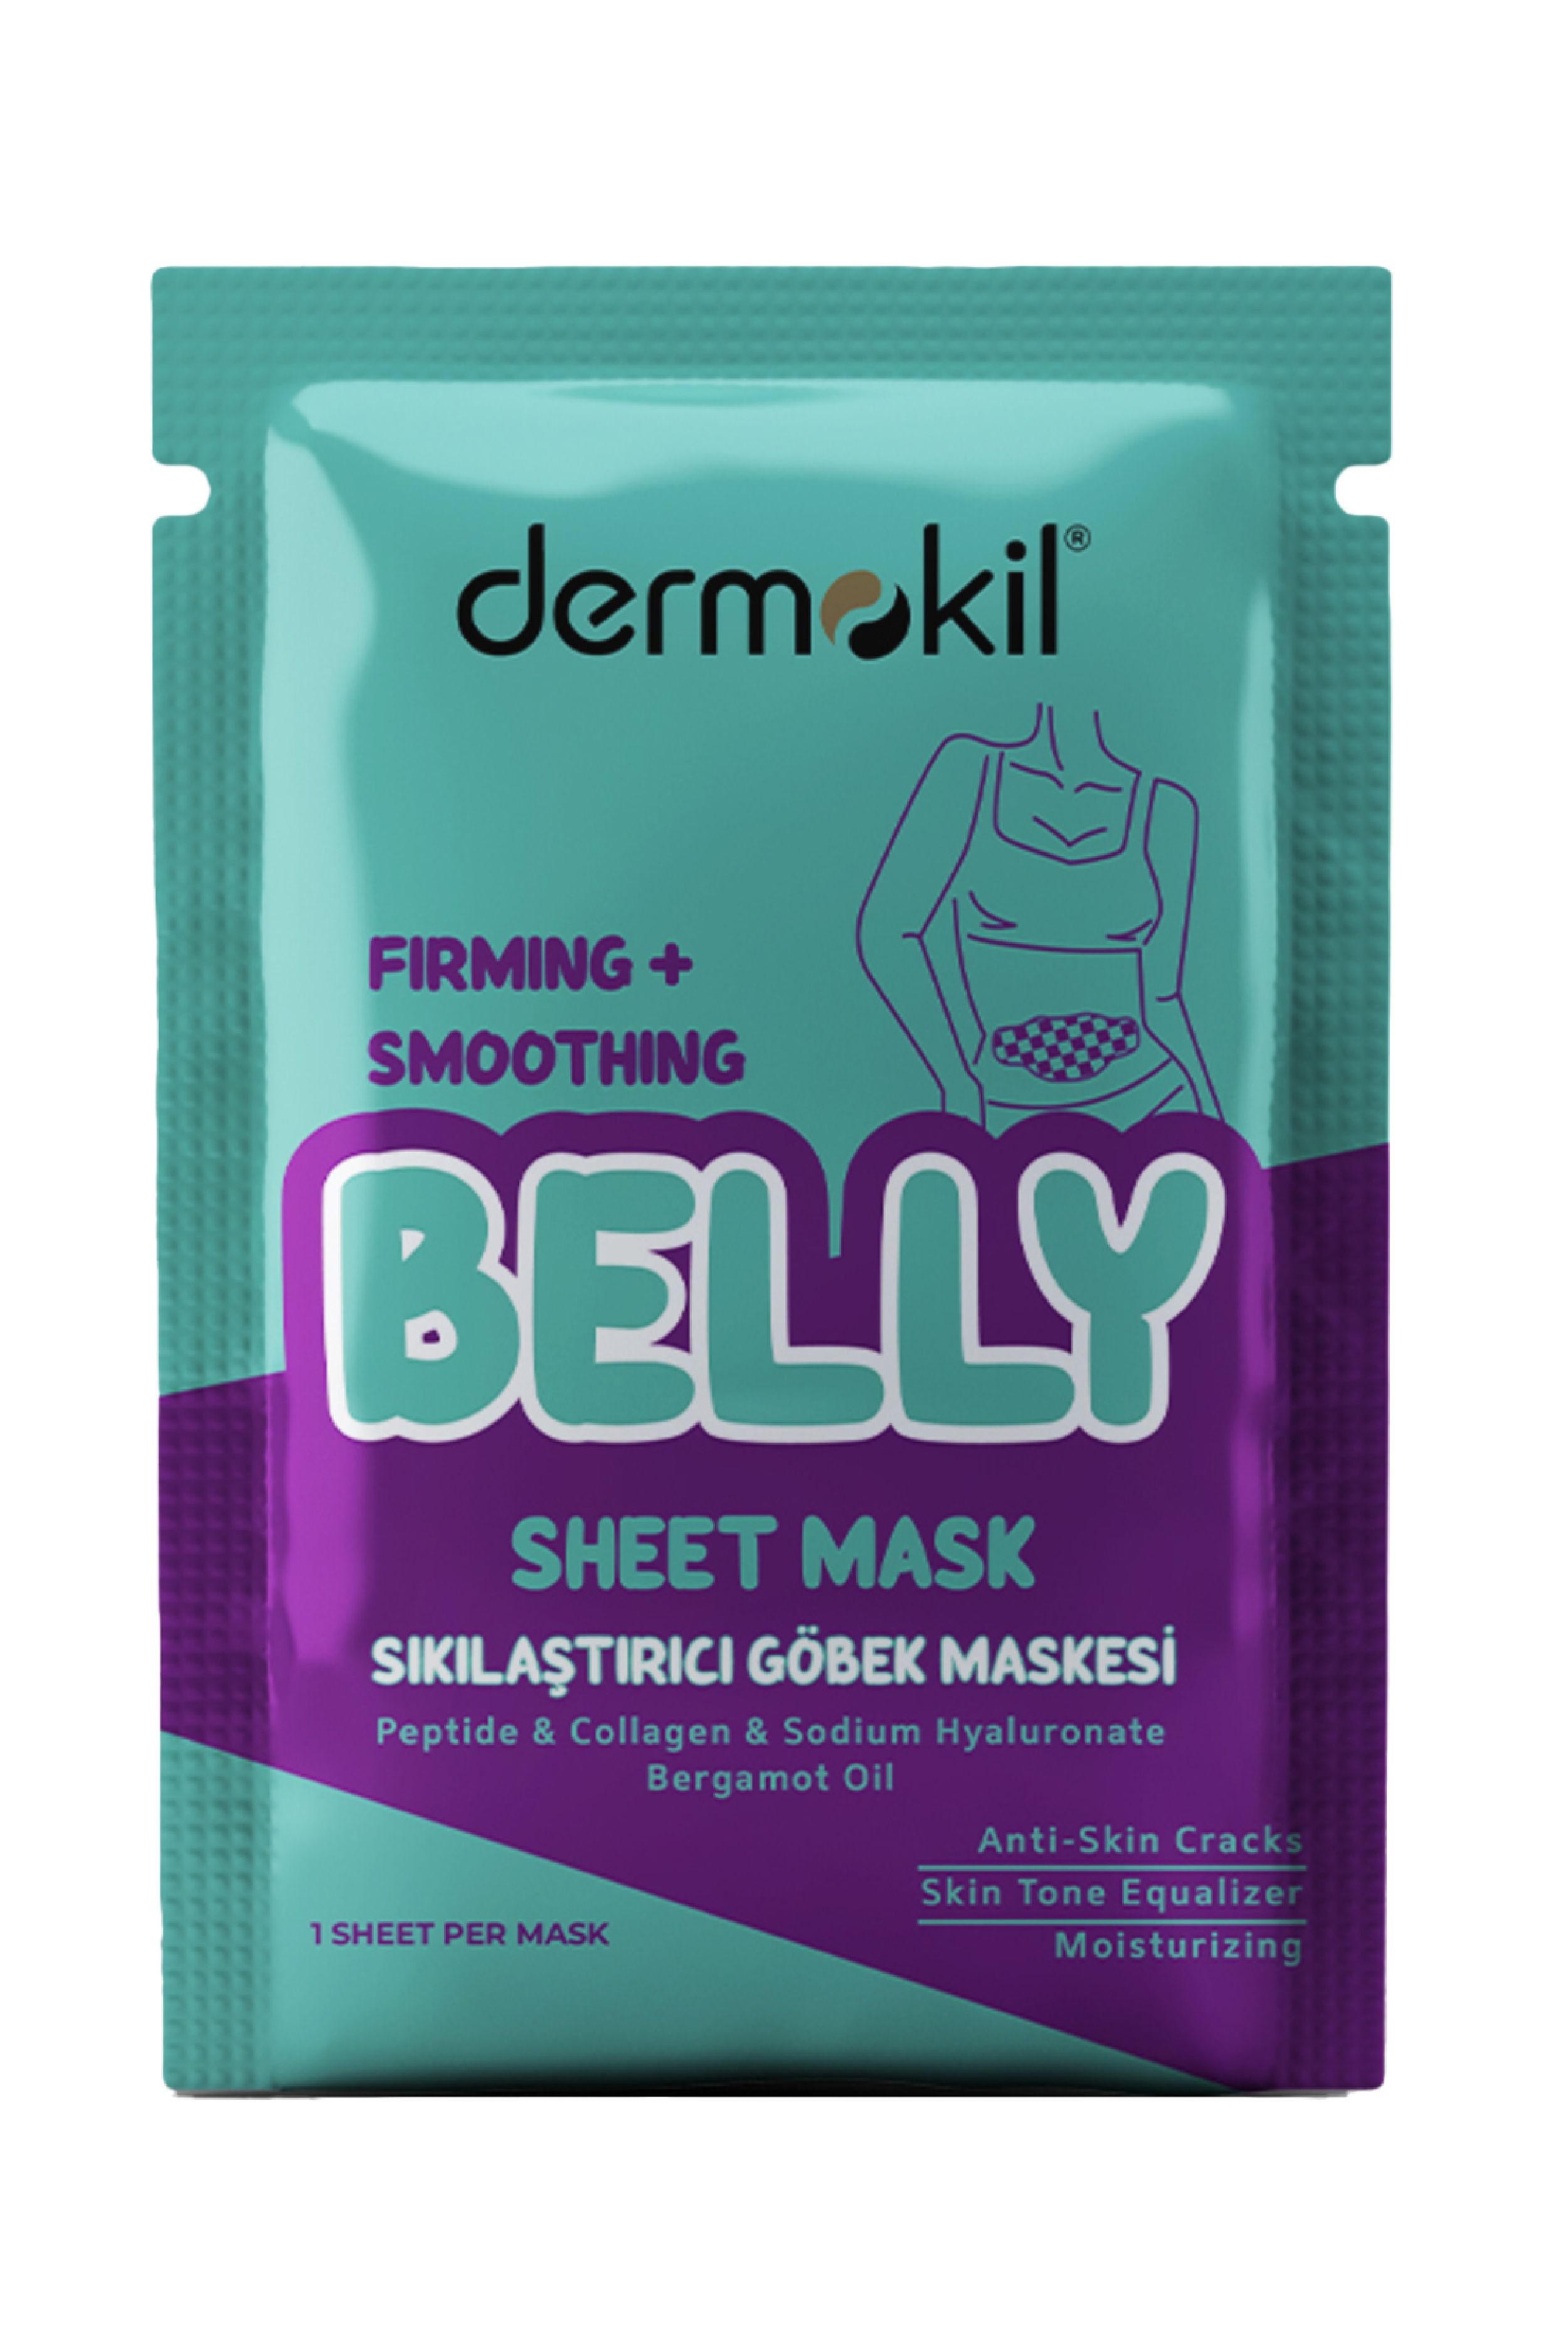 Belly mask 15 ml